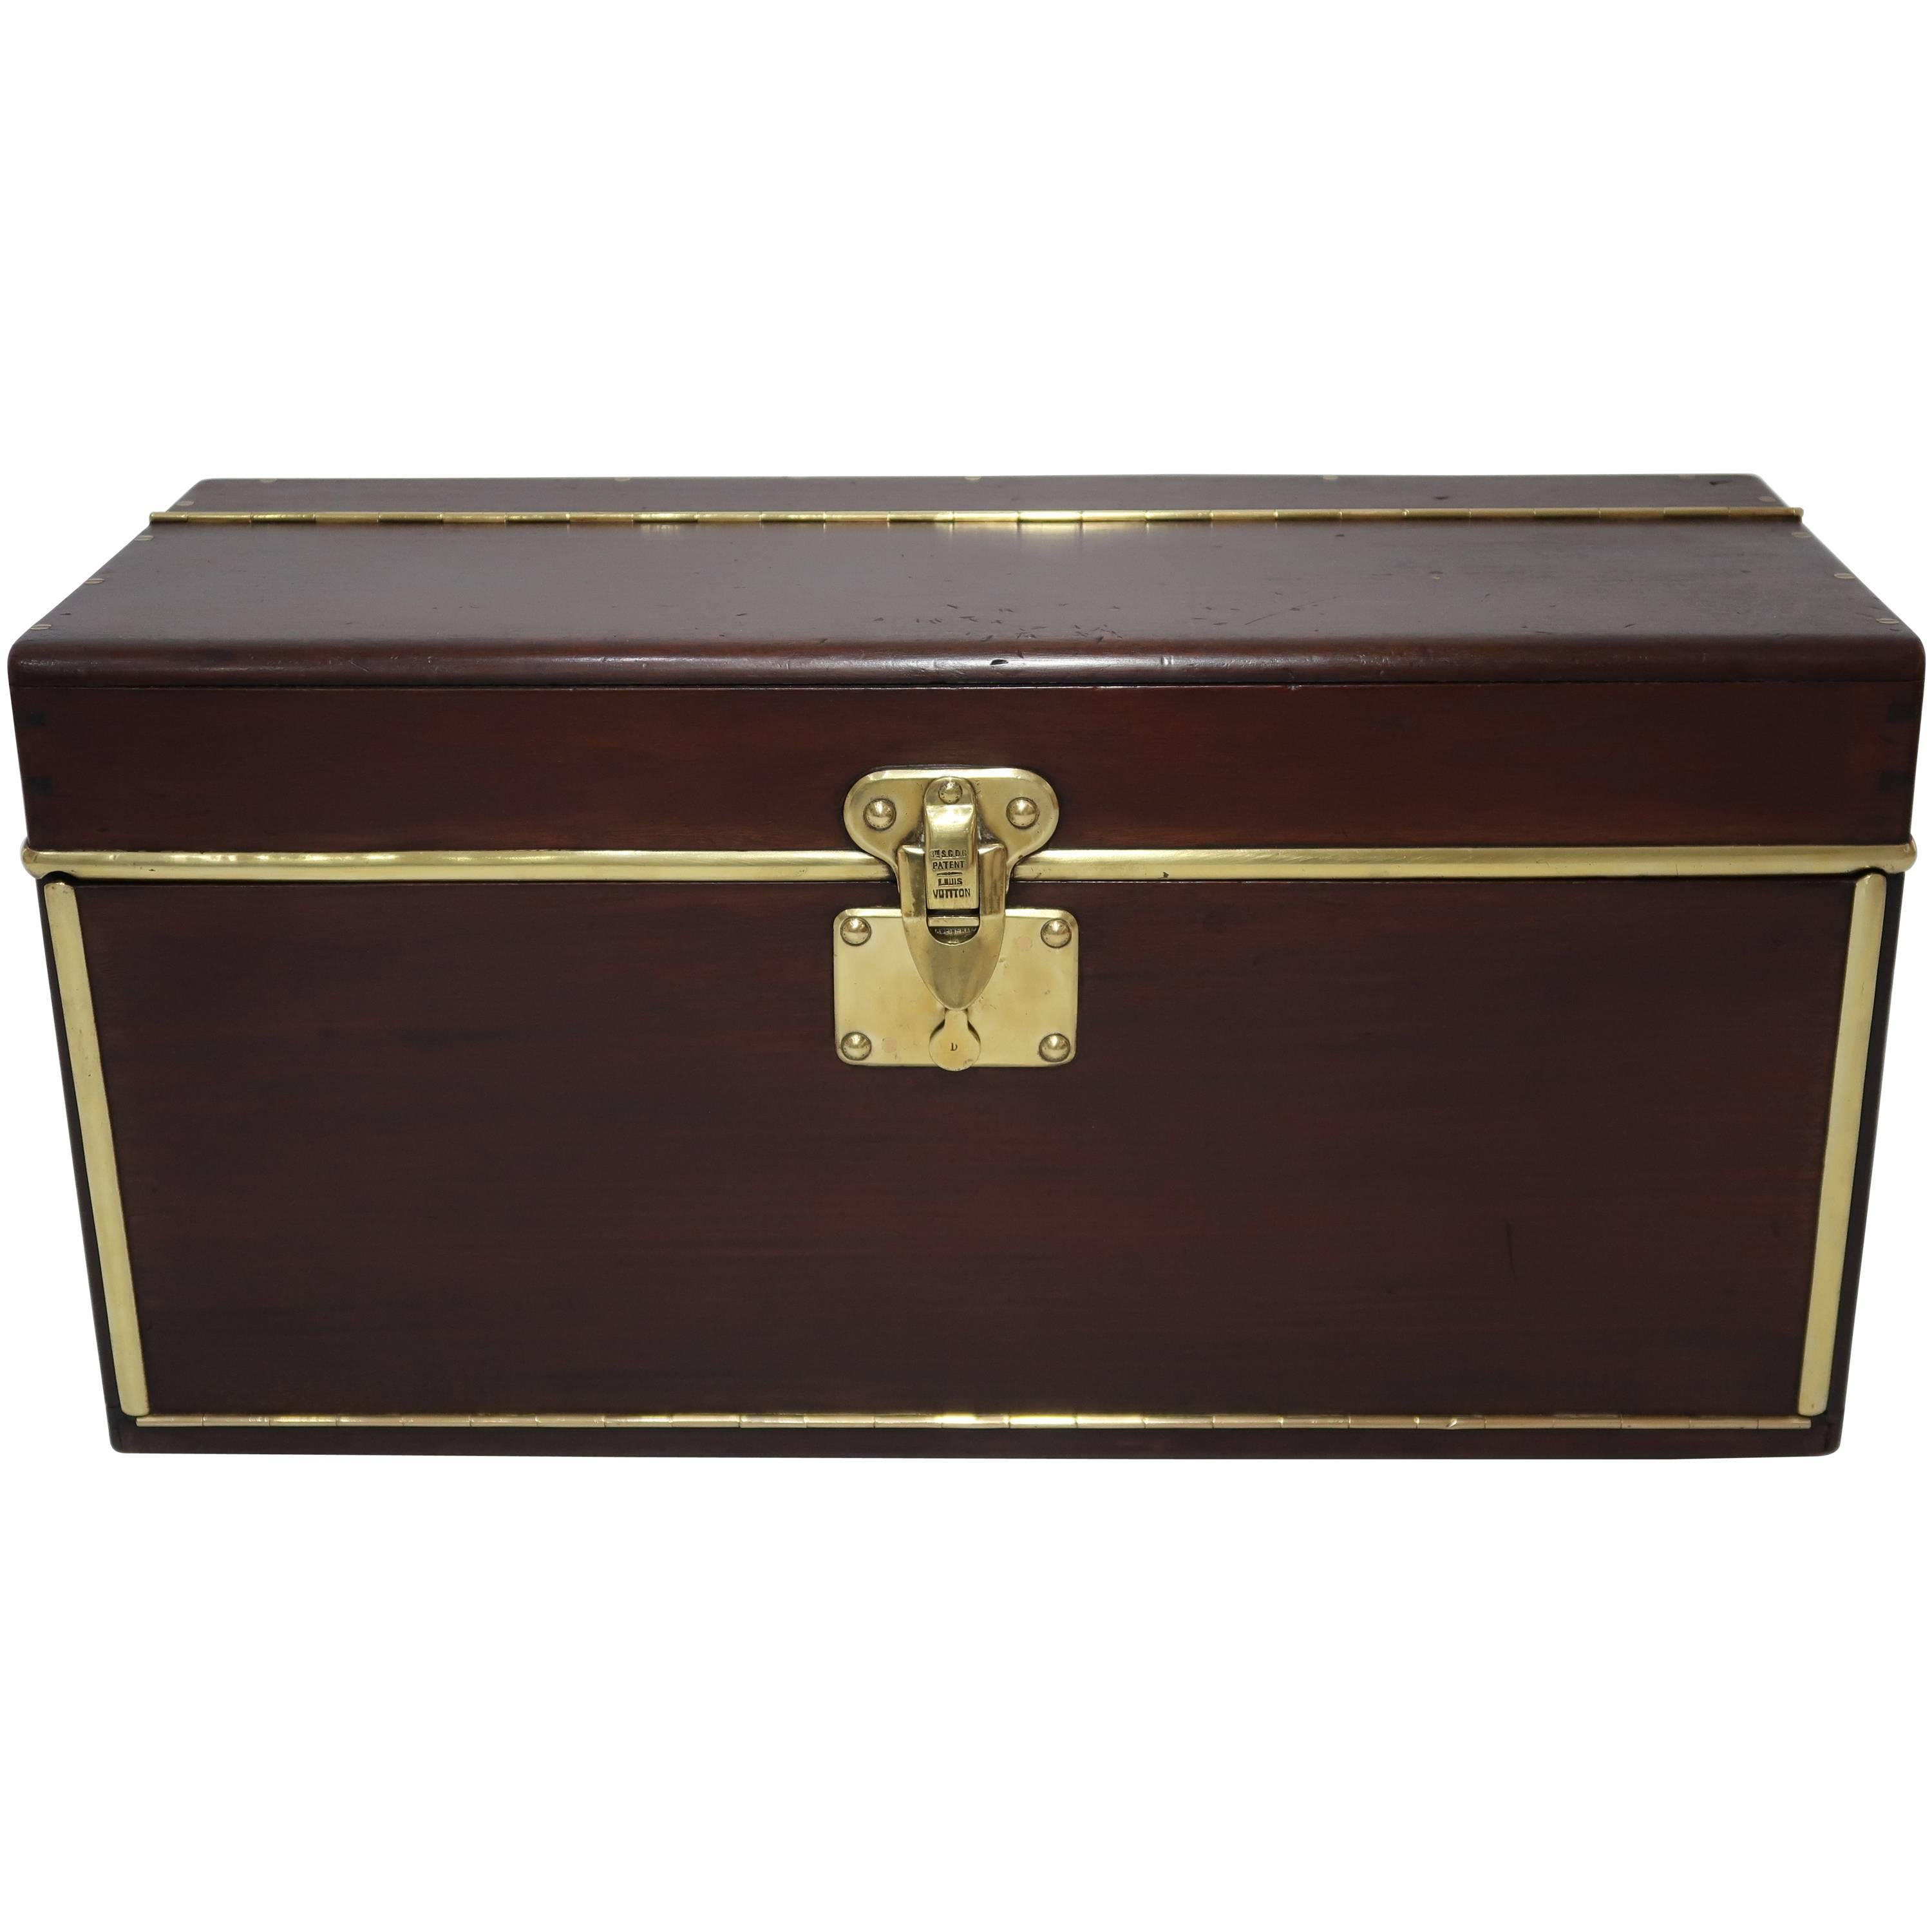 1890s Louis Vuitton Wooden Tool Box Trunk, 1 of the 100 Legendary Trunks For Sale